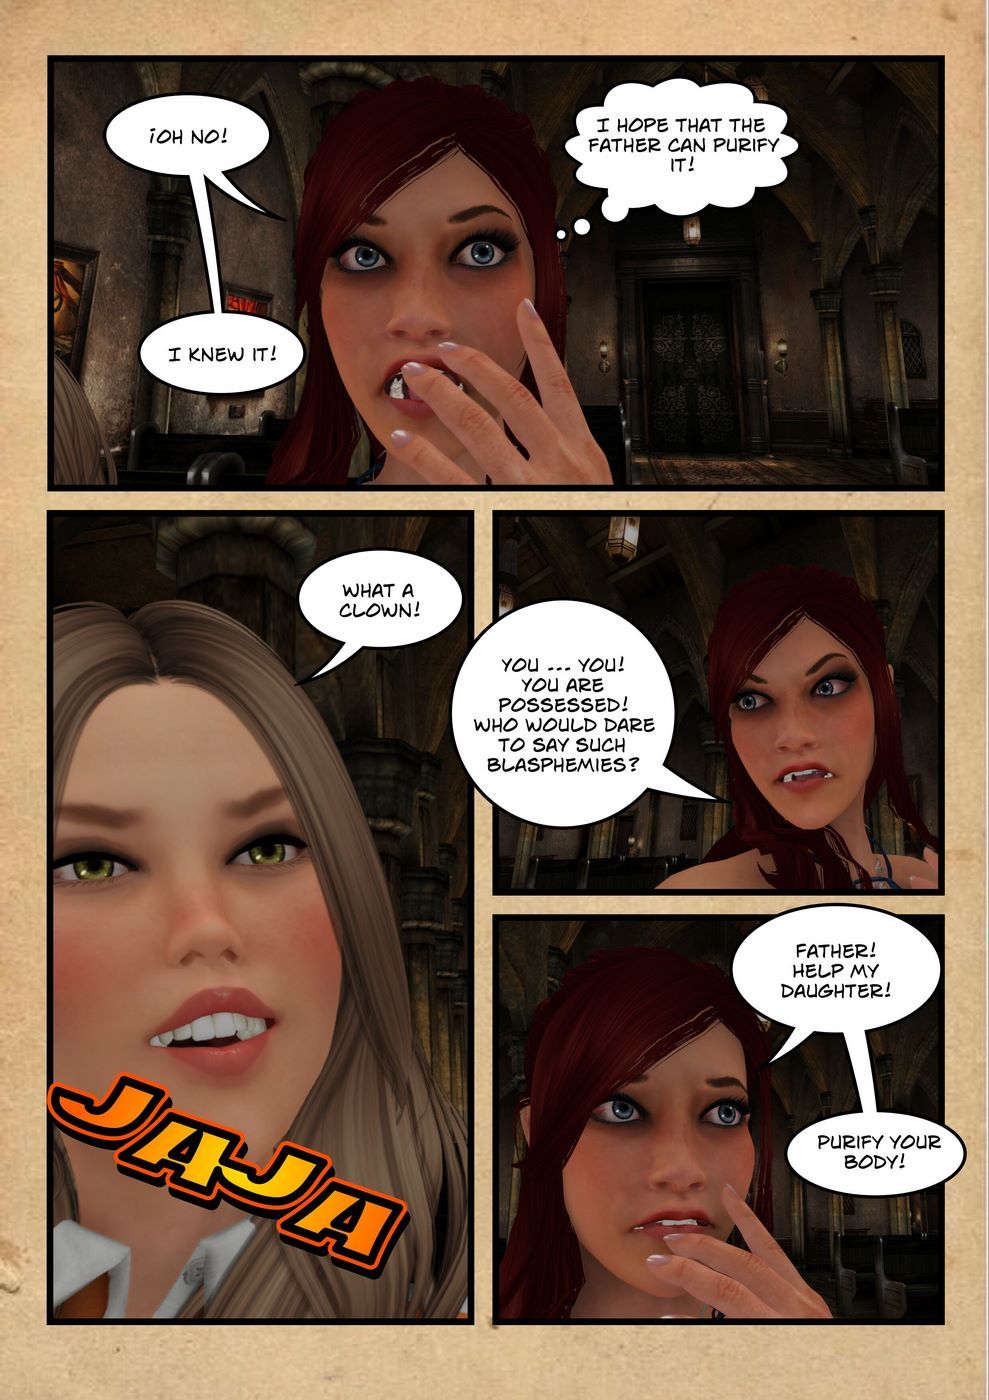 Testing The Faith - Supersoft2 page 18